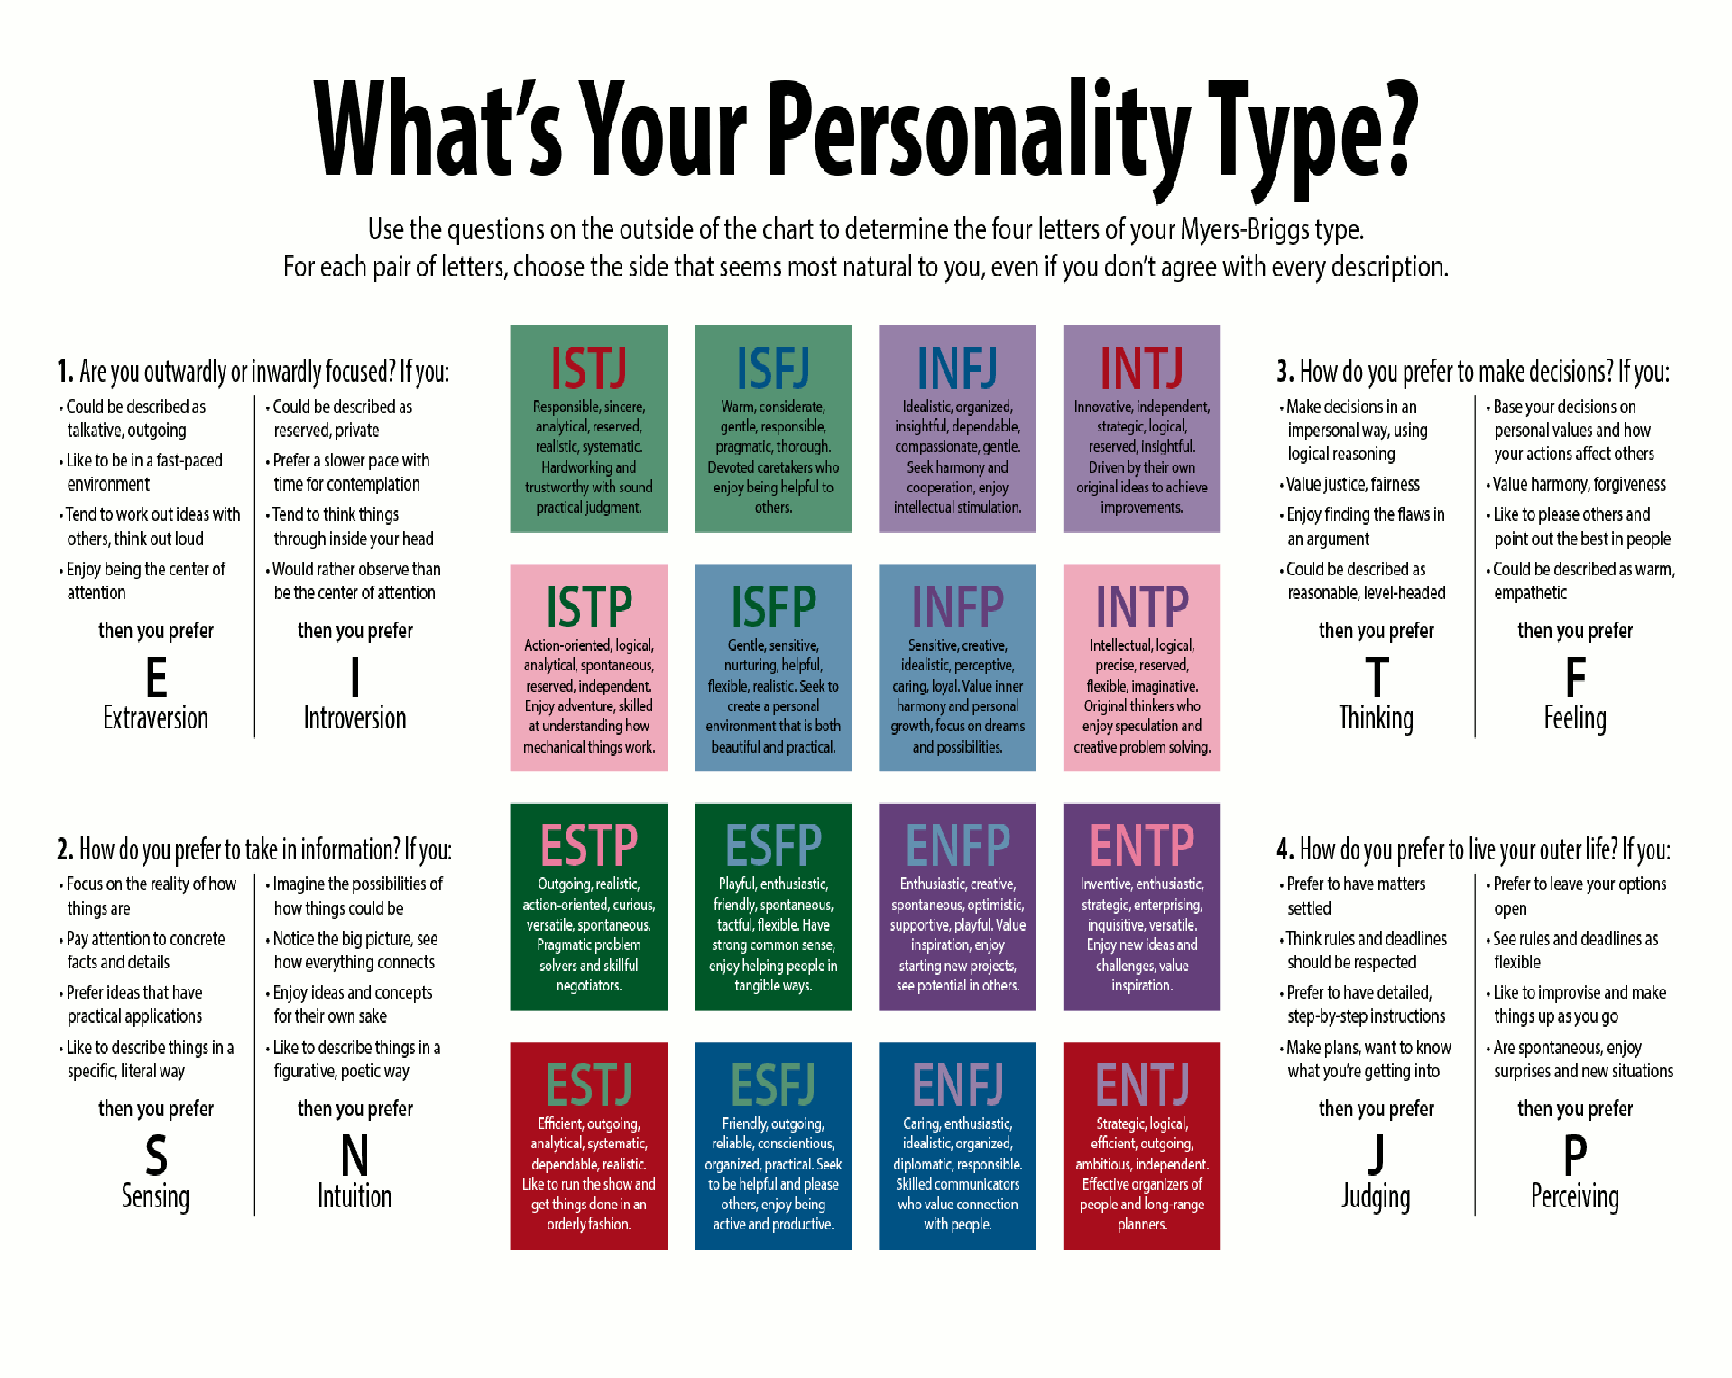 #Personality tests - what's your #MBTI? #test #psychology http://t.co/...